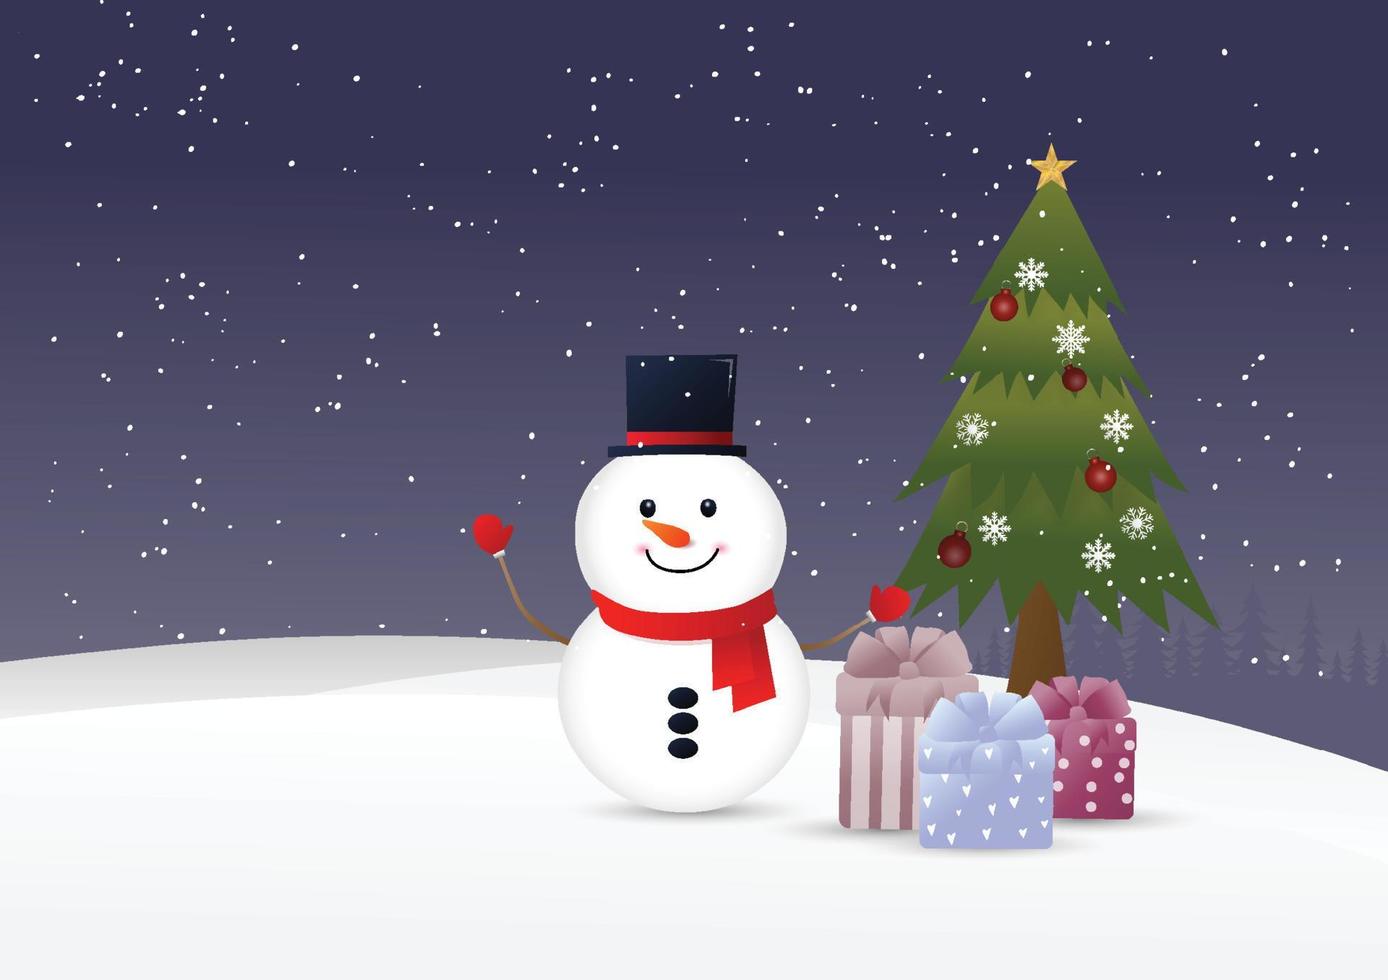 Snowman and Christmas gifts on winter background vector